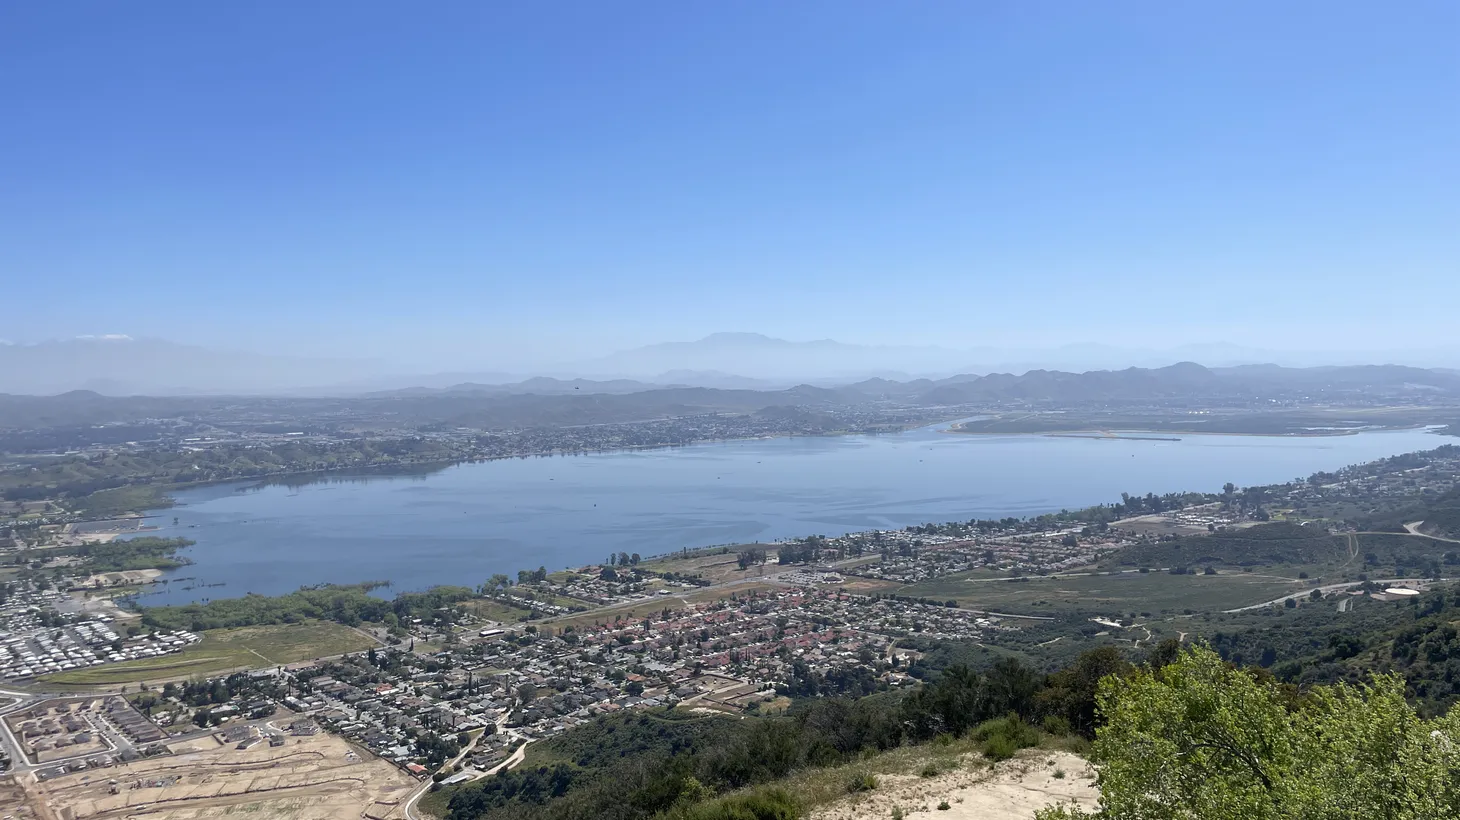 After a new investment and a wet winter, Lake Elsinore is the bluest and cleanest it’s been in years.